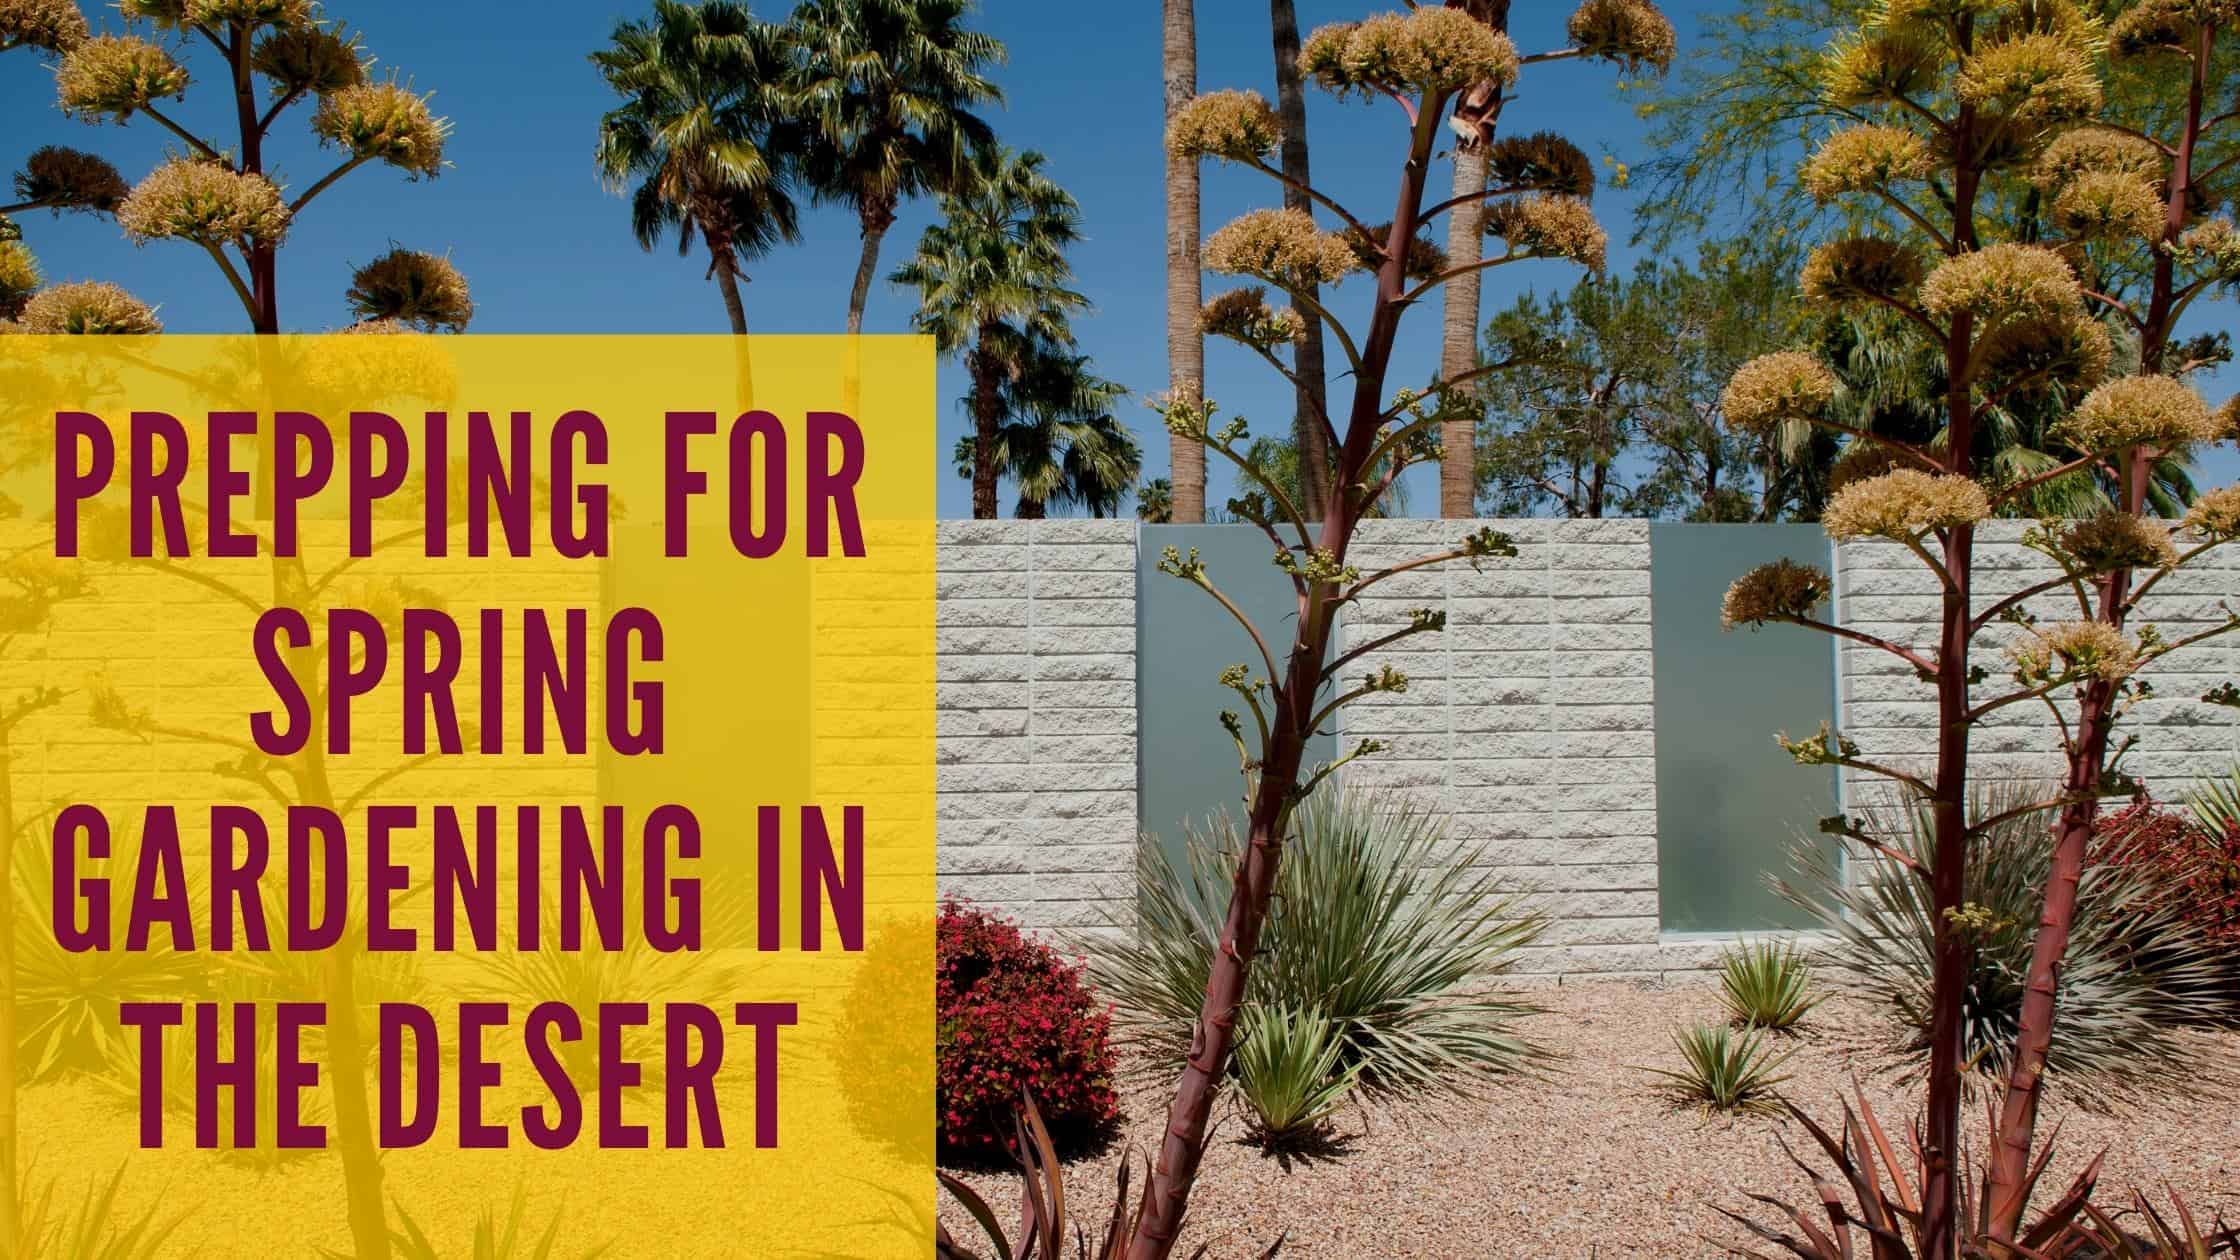 Featured image for “Prepping for Spring Gardening in the Desert”